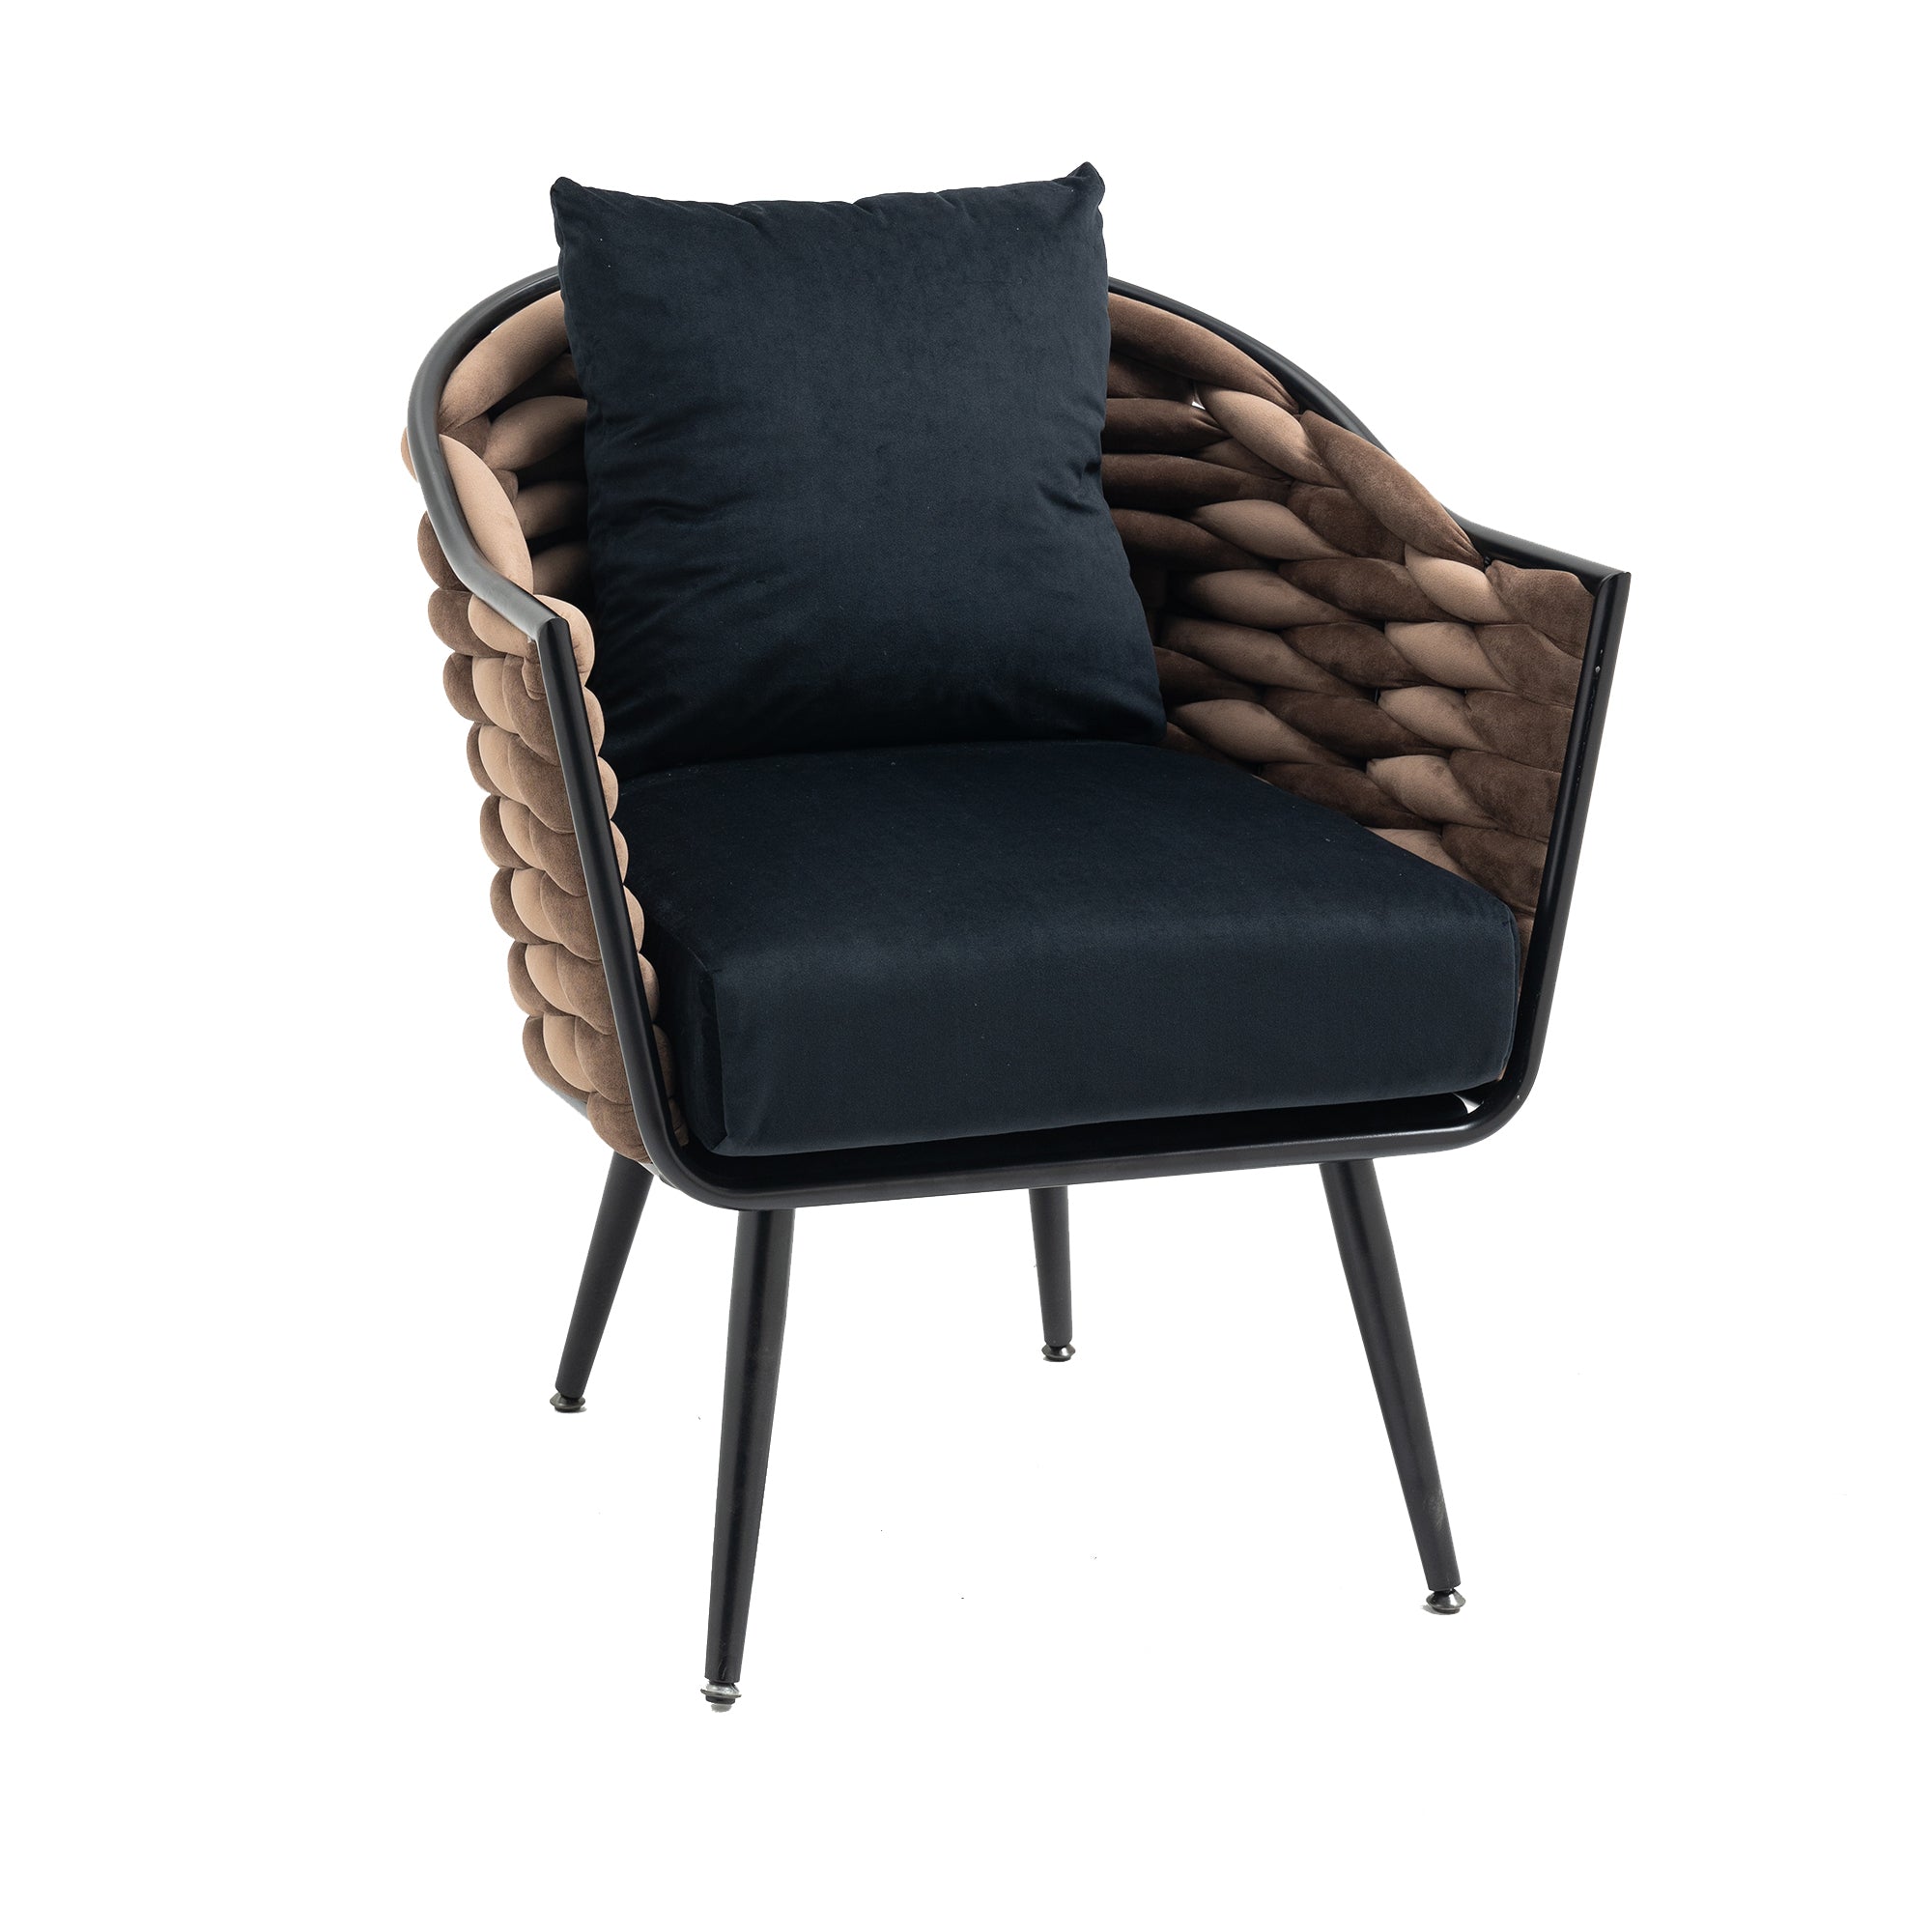 Modern Velvet Accent Chair Upholstered Armchair Tufted with Metal Frame - Black